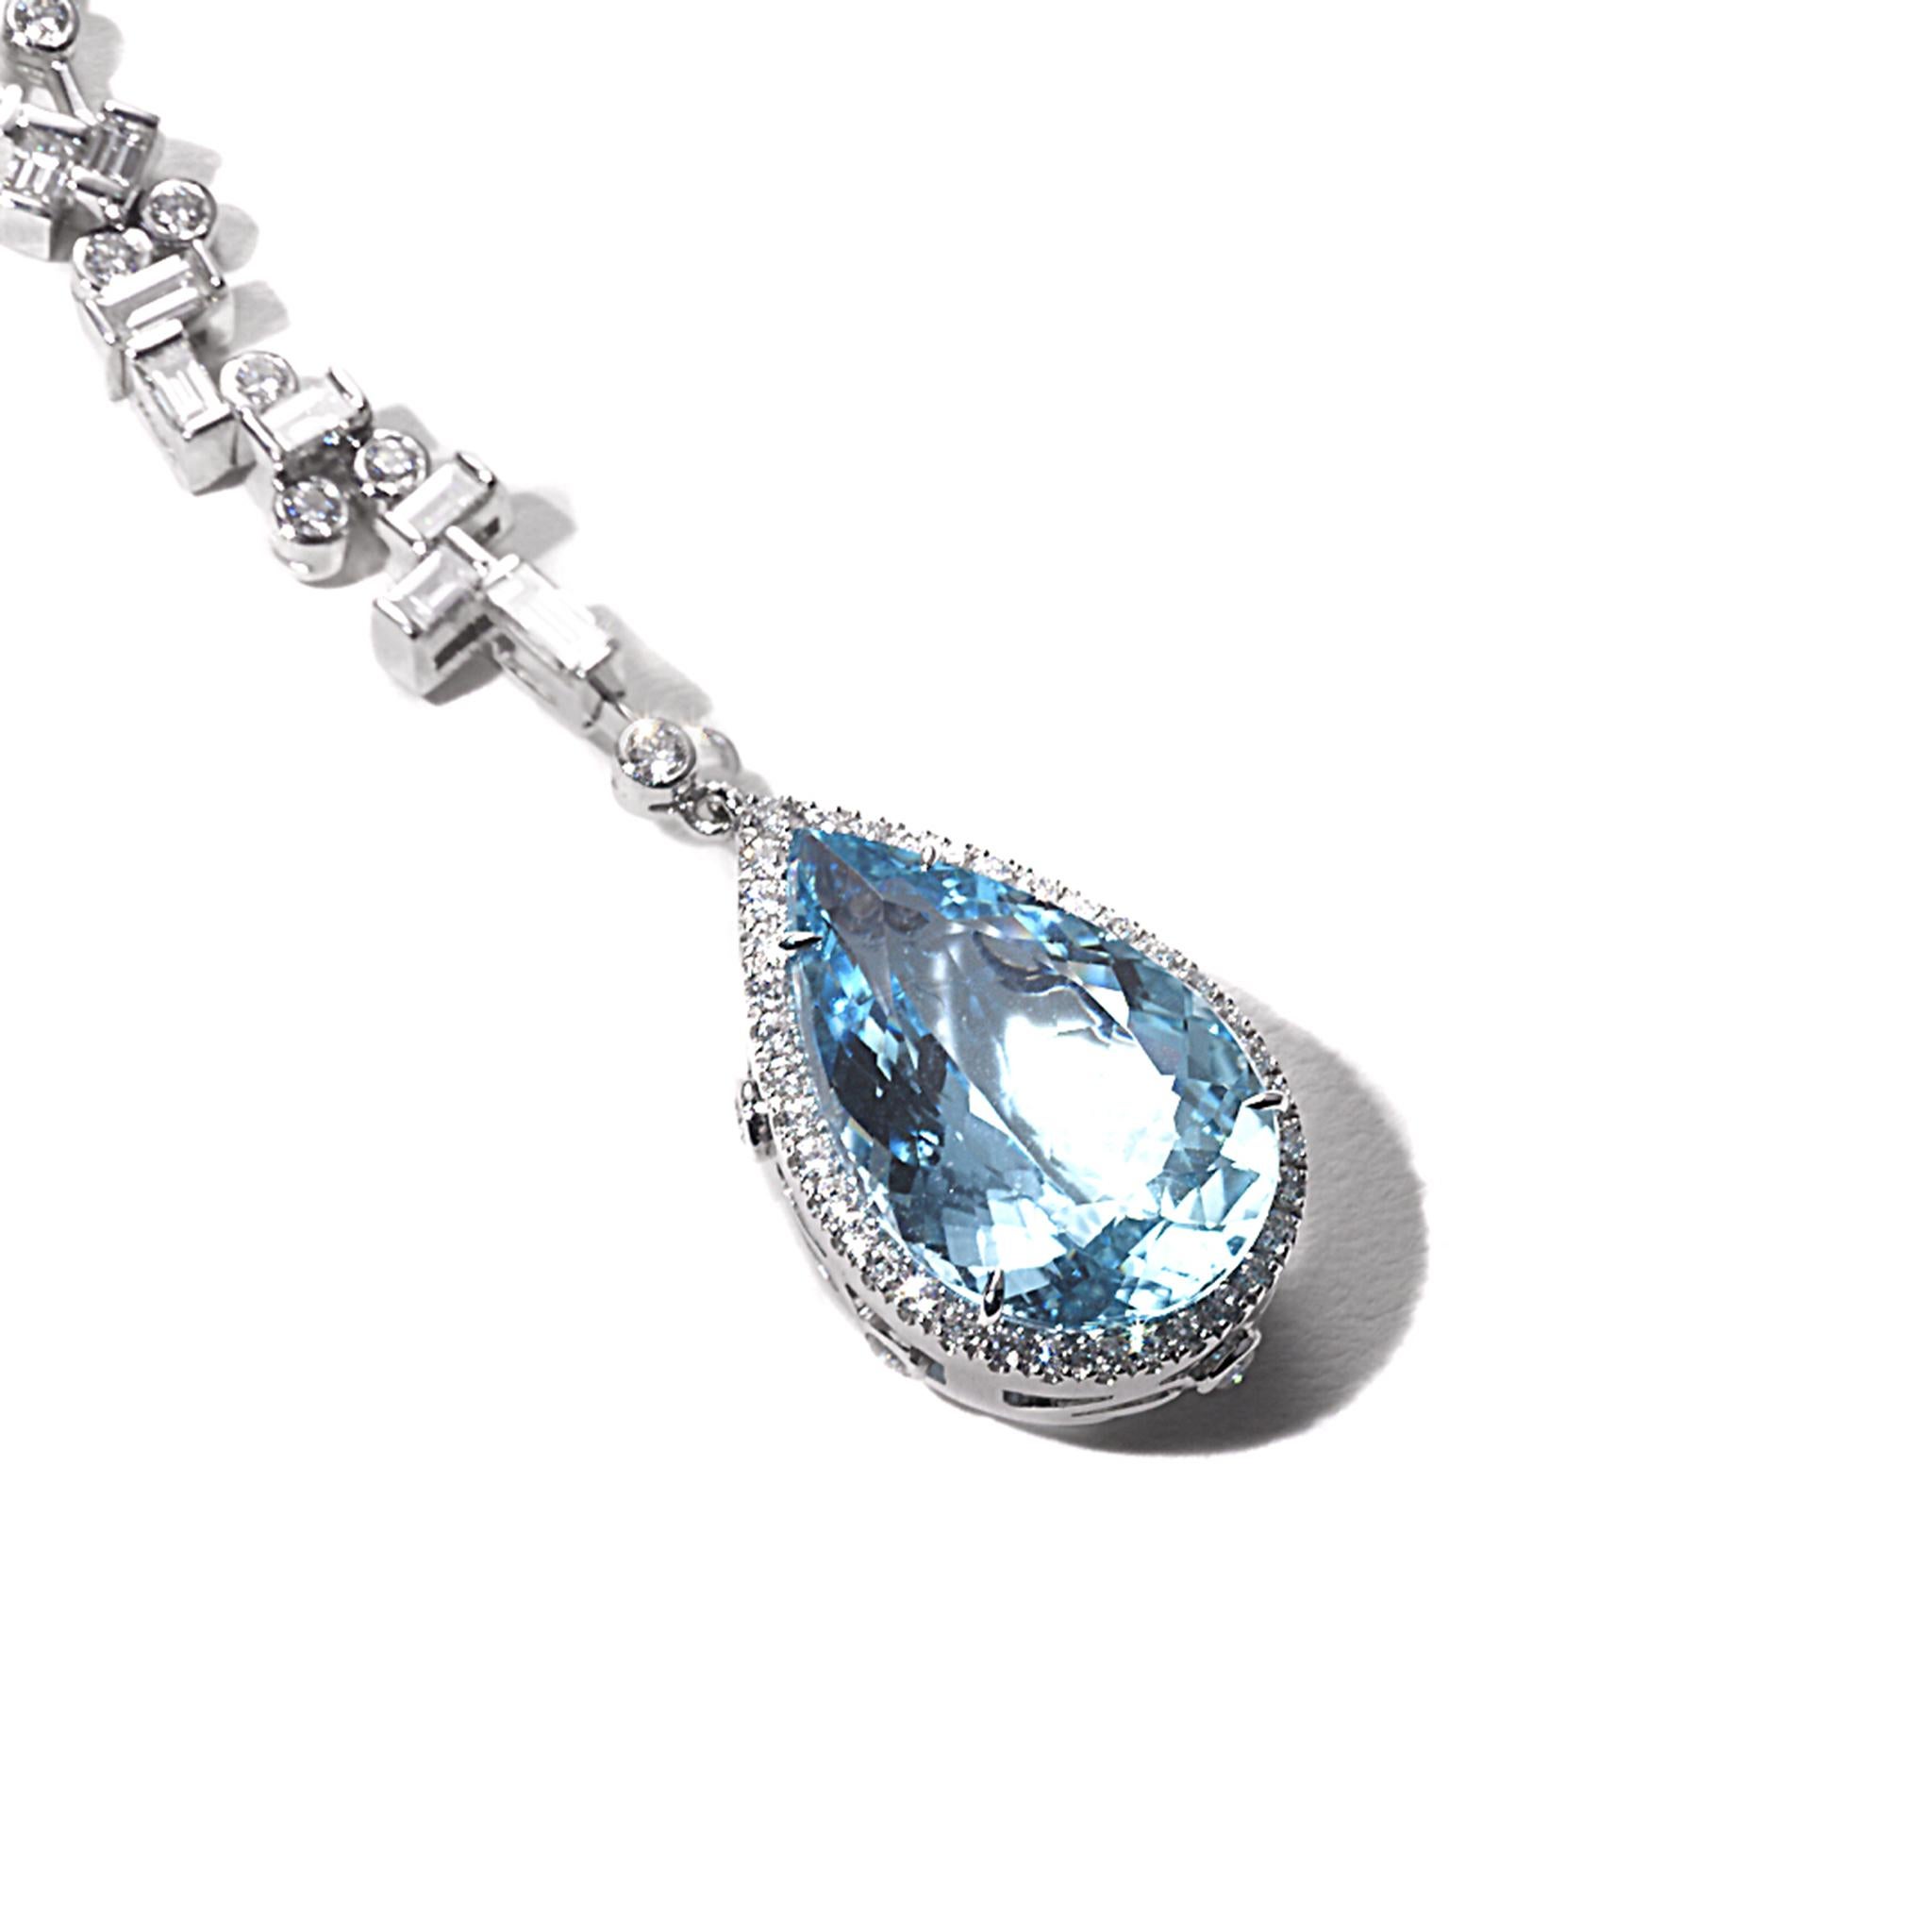 Trinity collection Y drop necklace set in 18K white gold with 7.91cts aquamarine and 4.20cts diamond. Length measures 18 inches.
